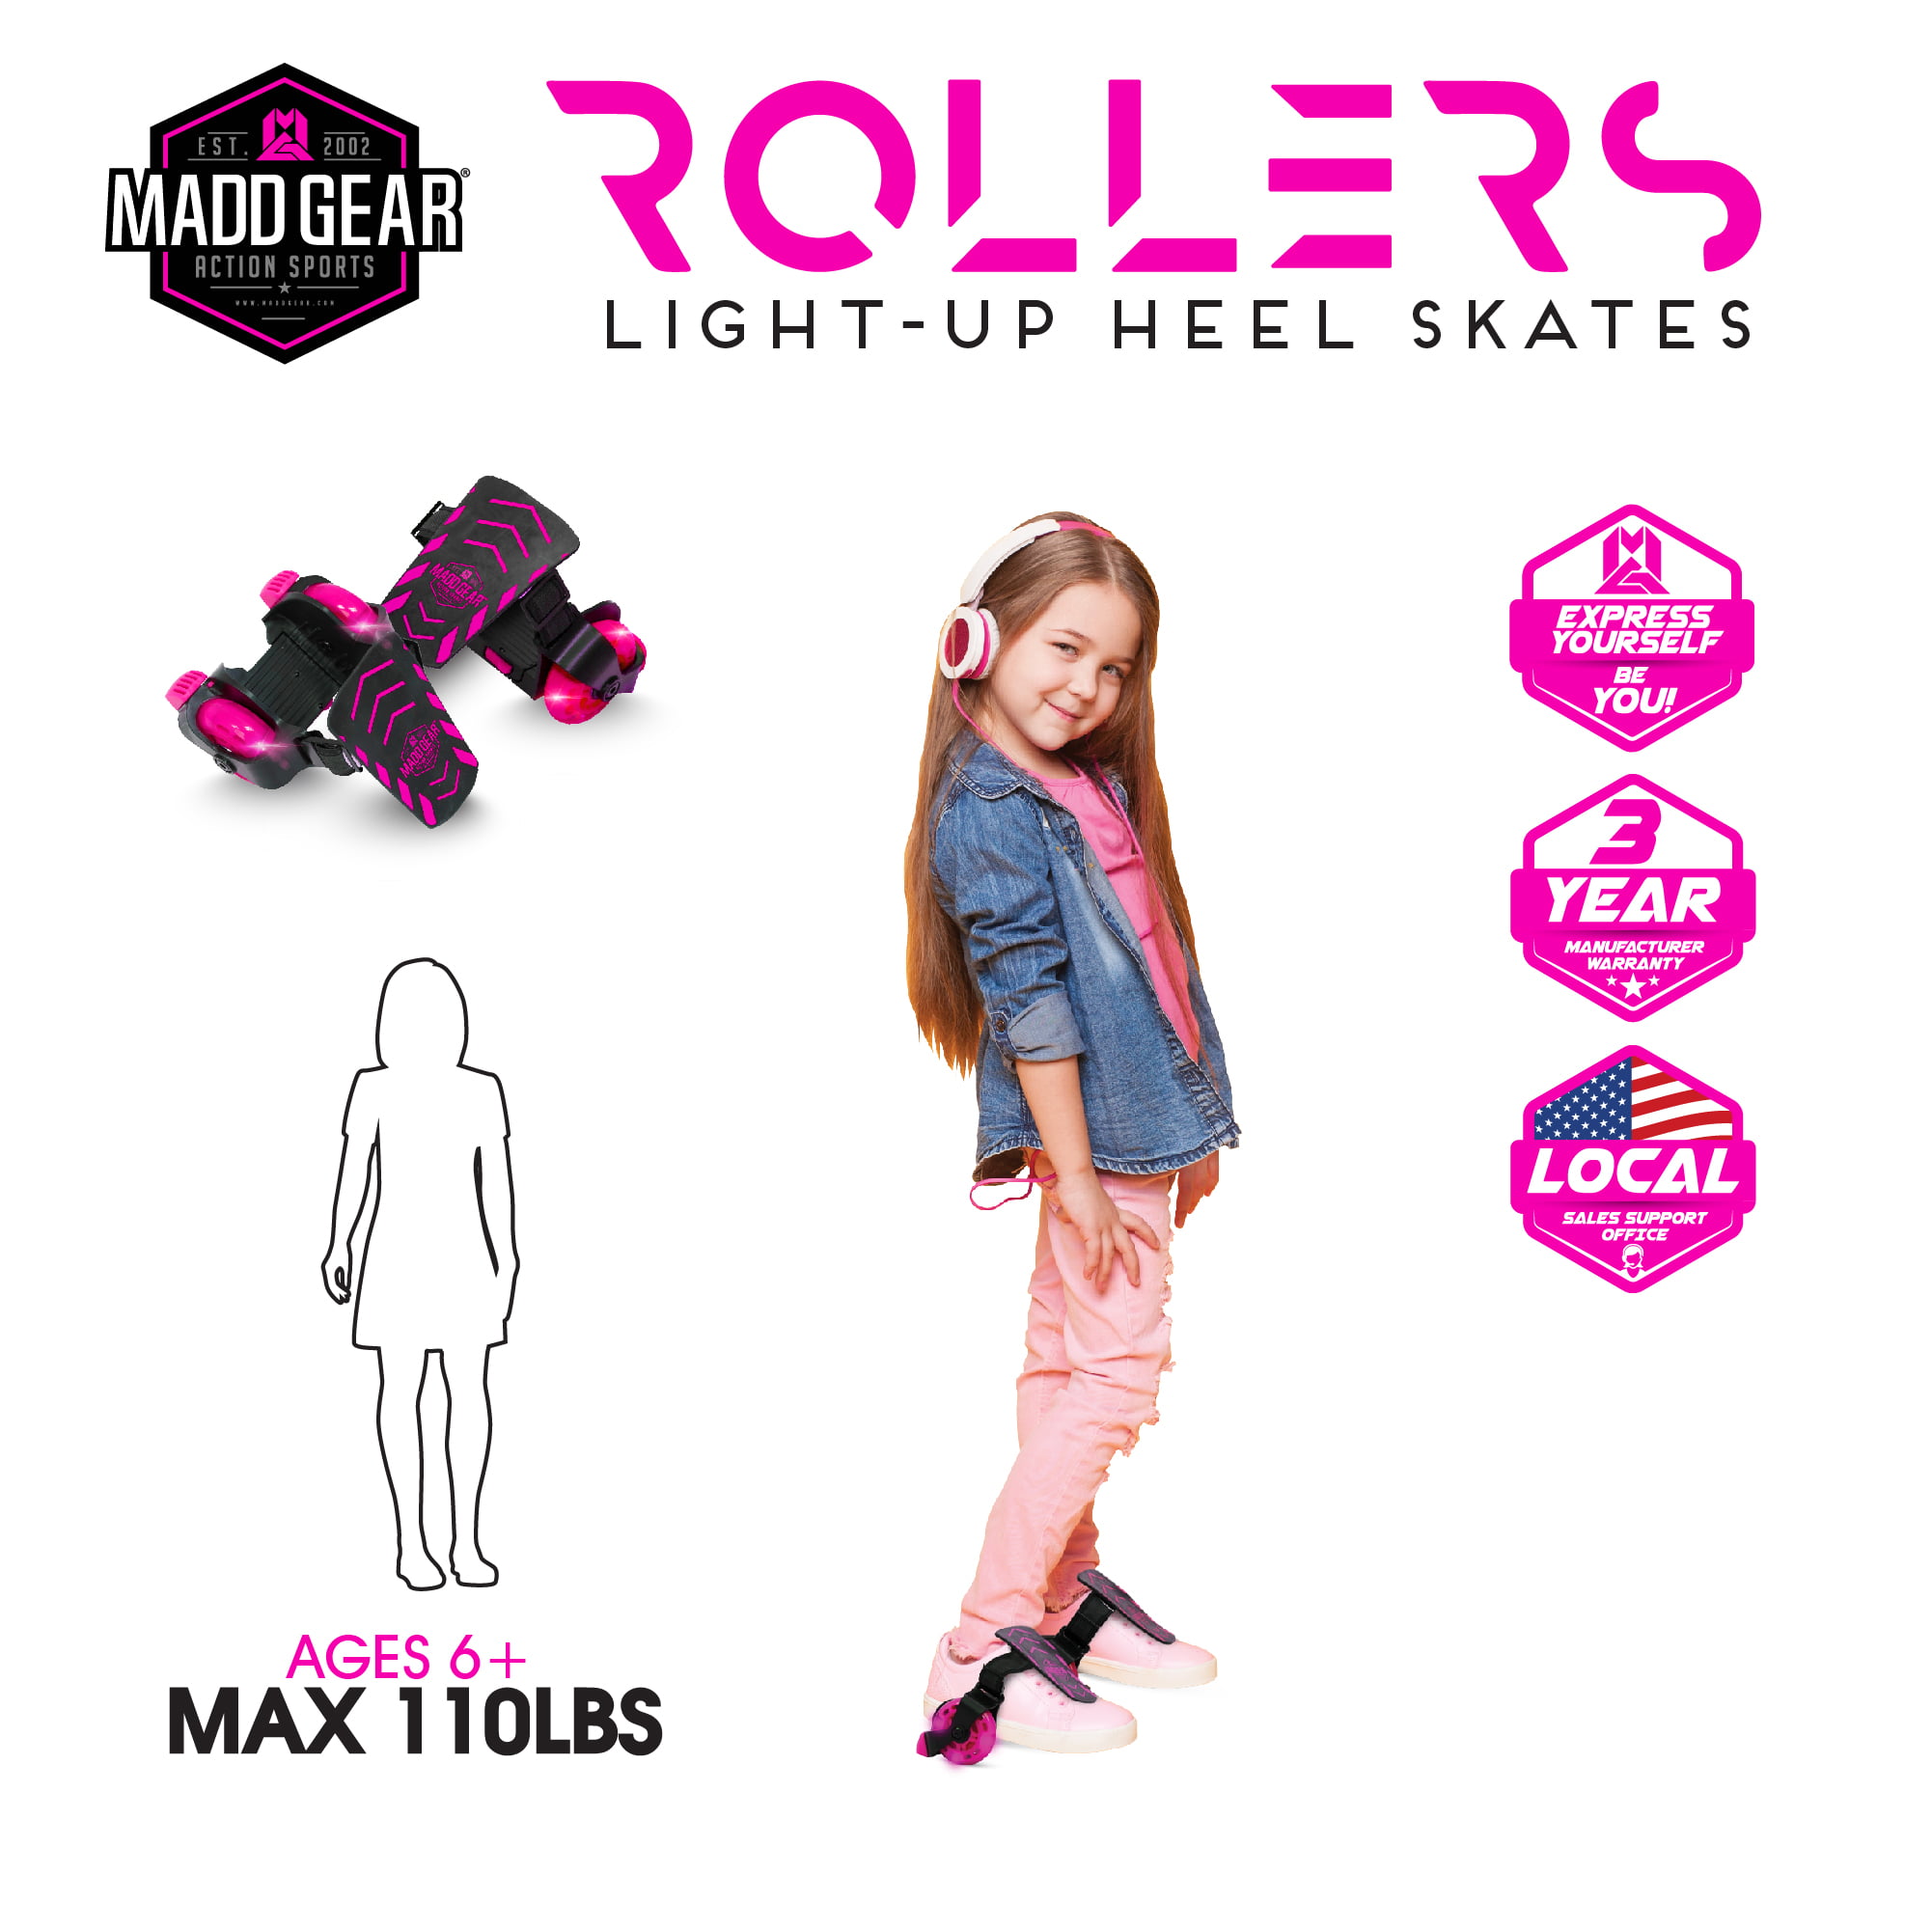 MADD Gear Rollers Light-up Heel Skates Suits Ages 6 Max Rider Weight 110lbs for sale online 